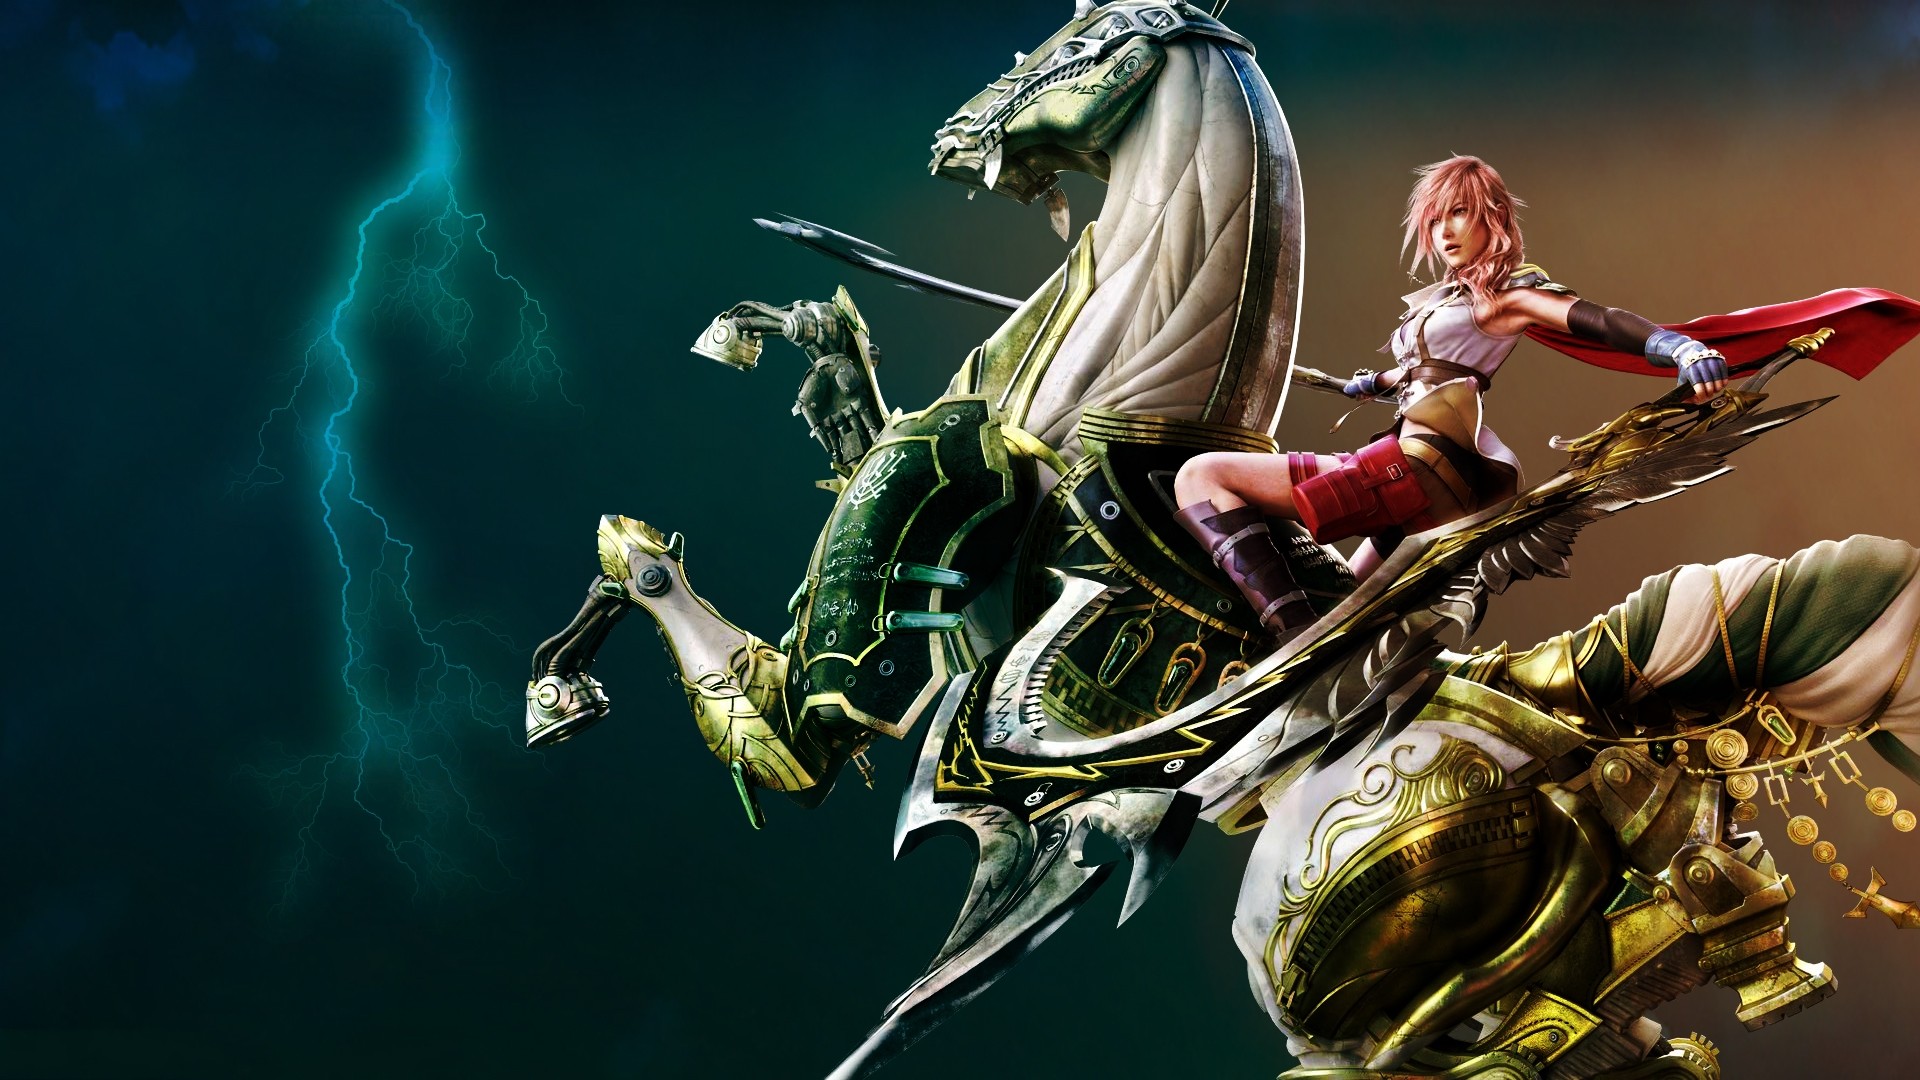 Warrior Woman and Horse Full HD Wallpaper and Background